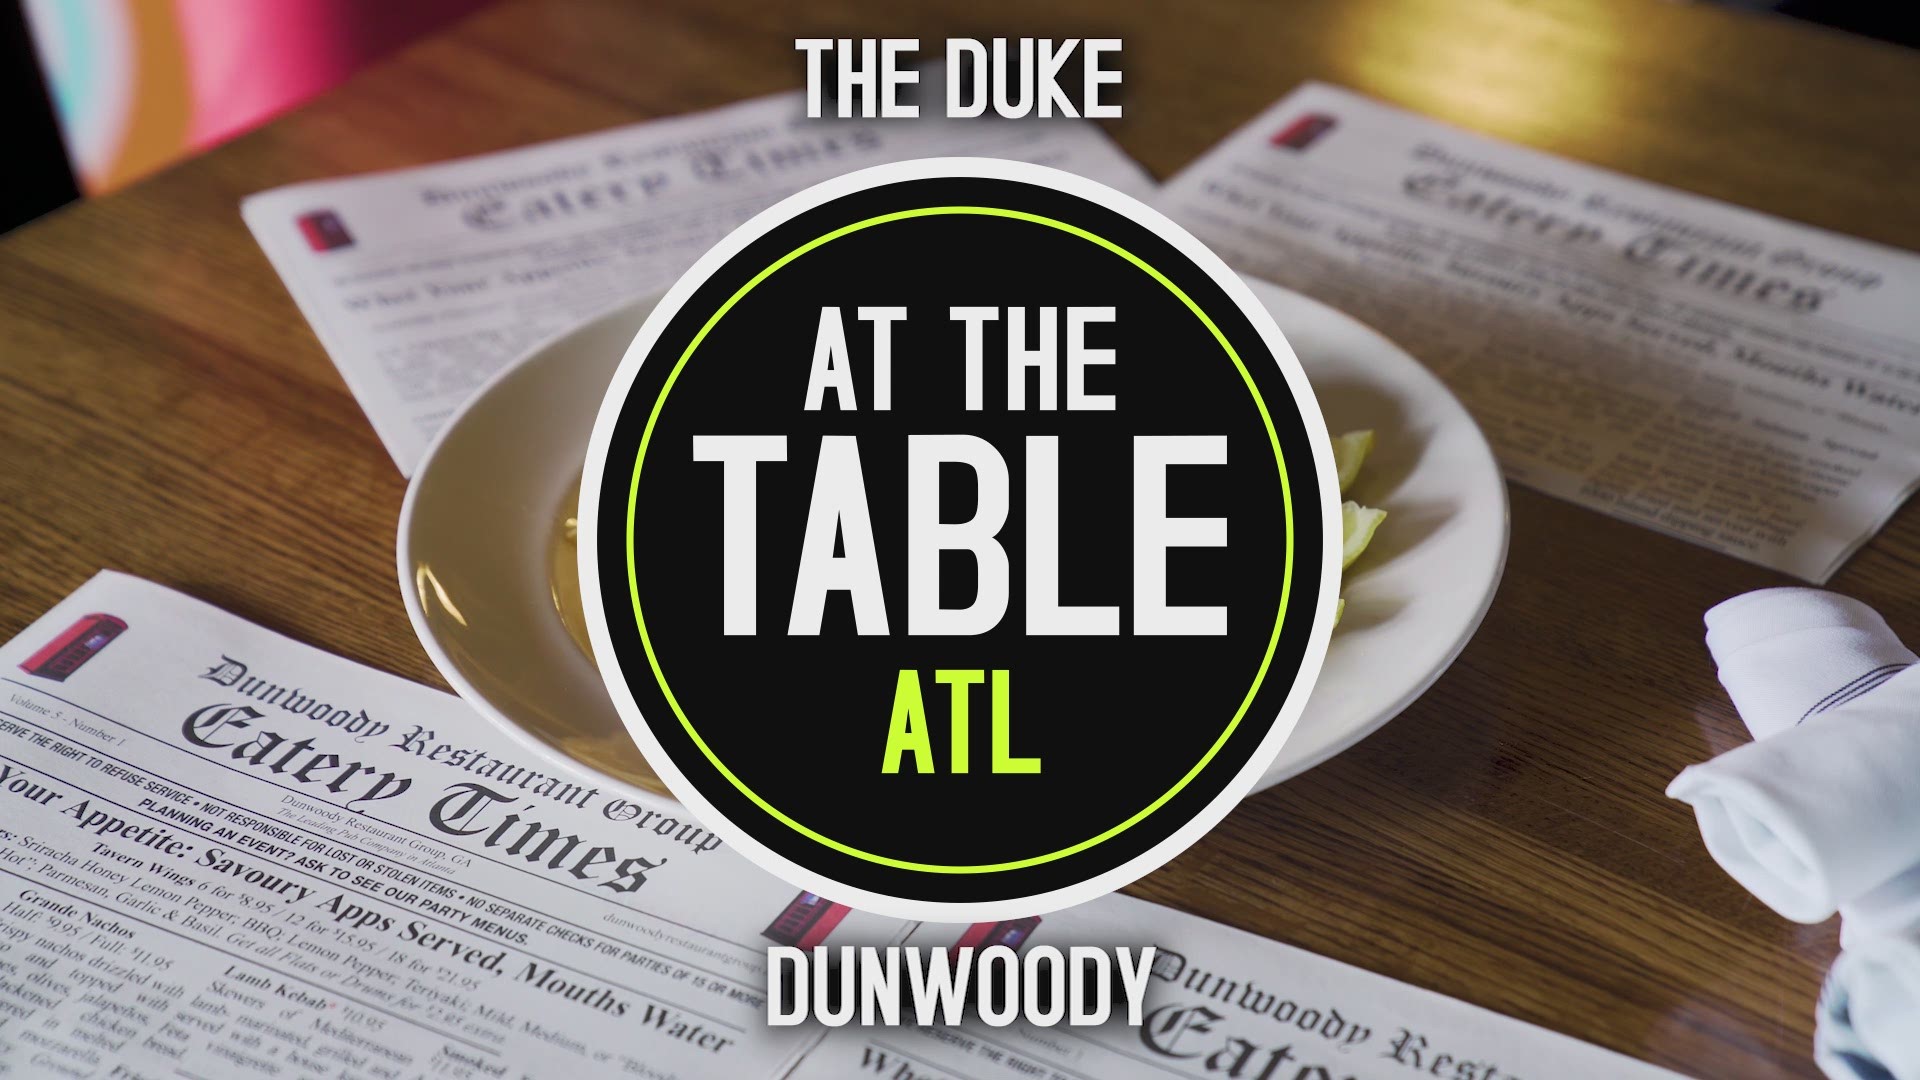 Channel our neighbors across the pond with a visit to The Duke.